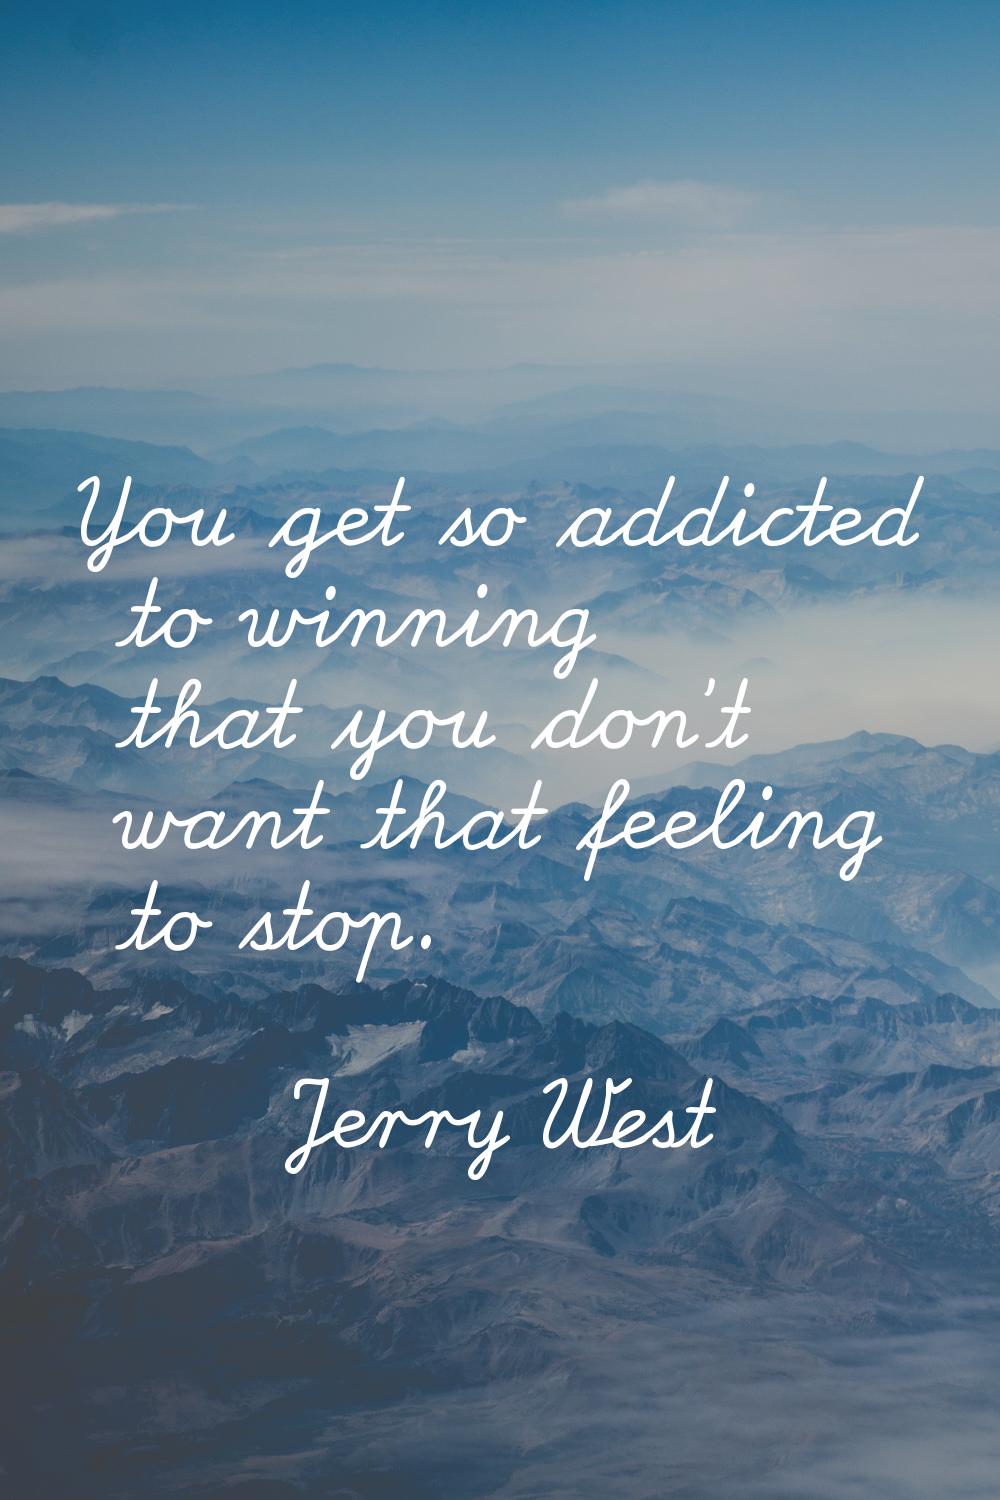 You get so addicted to winning that you don't want that feeling to stop.